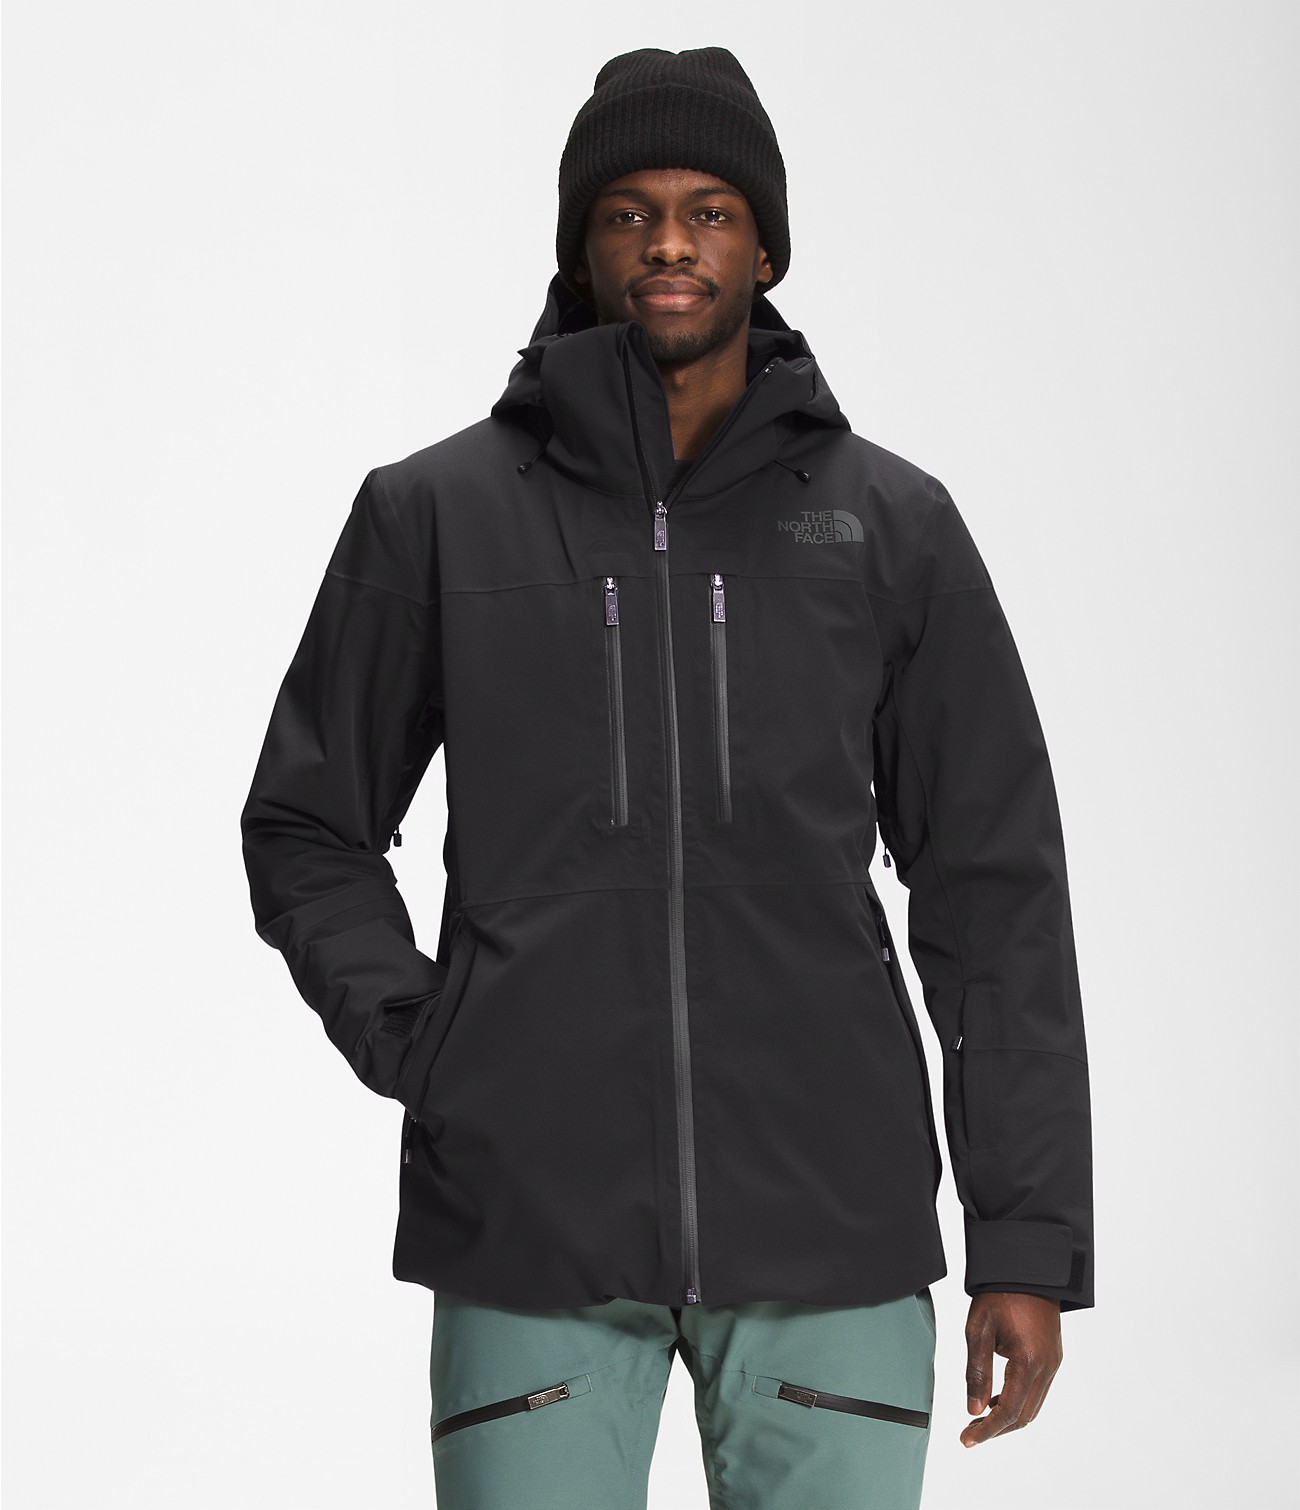 Unlock Wilderness' choice in the Burton Vs North Face comparison, the Chakal Jacket by The North Face